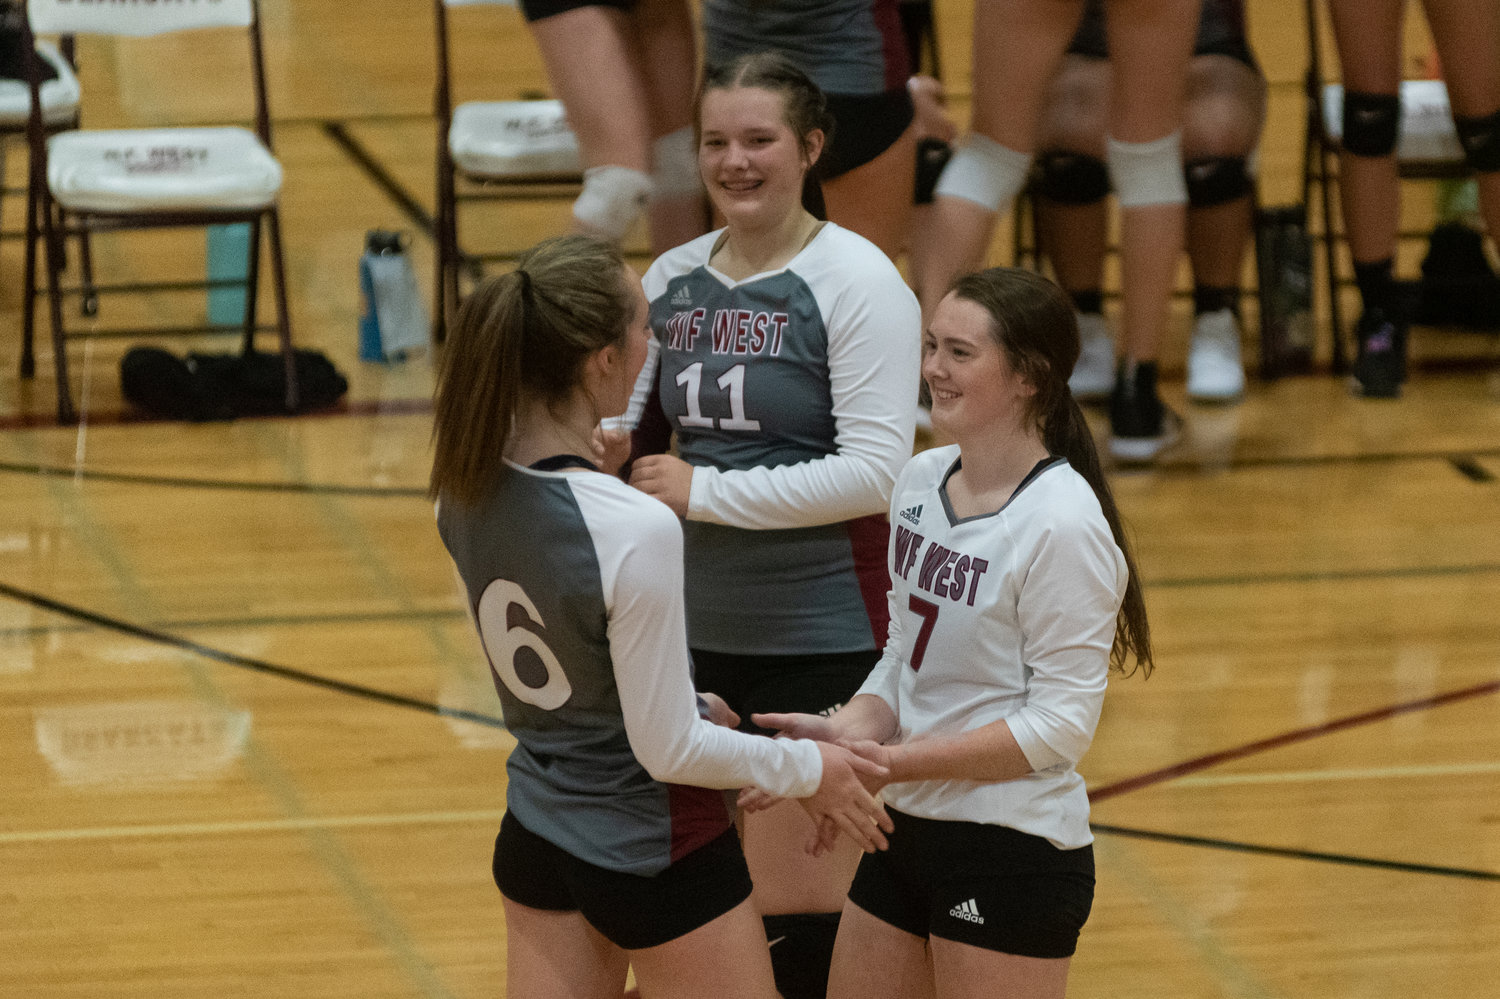 W.F. West volleyball players Kambriah Simper (7), Morgan Rogerson (6), and Savannah Hawkins (11) celebrate a point against Aberdeen Oct. 26.